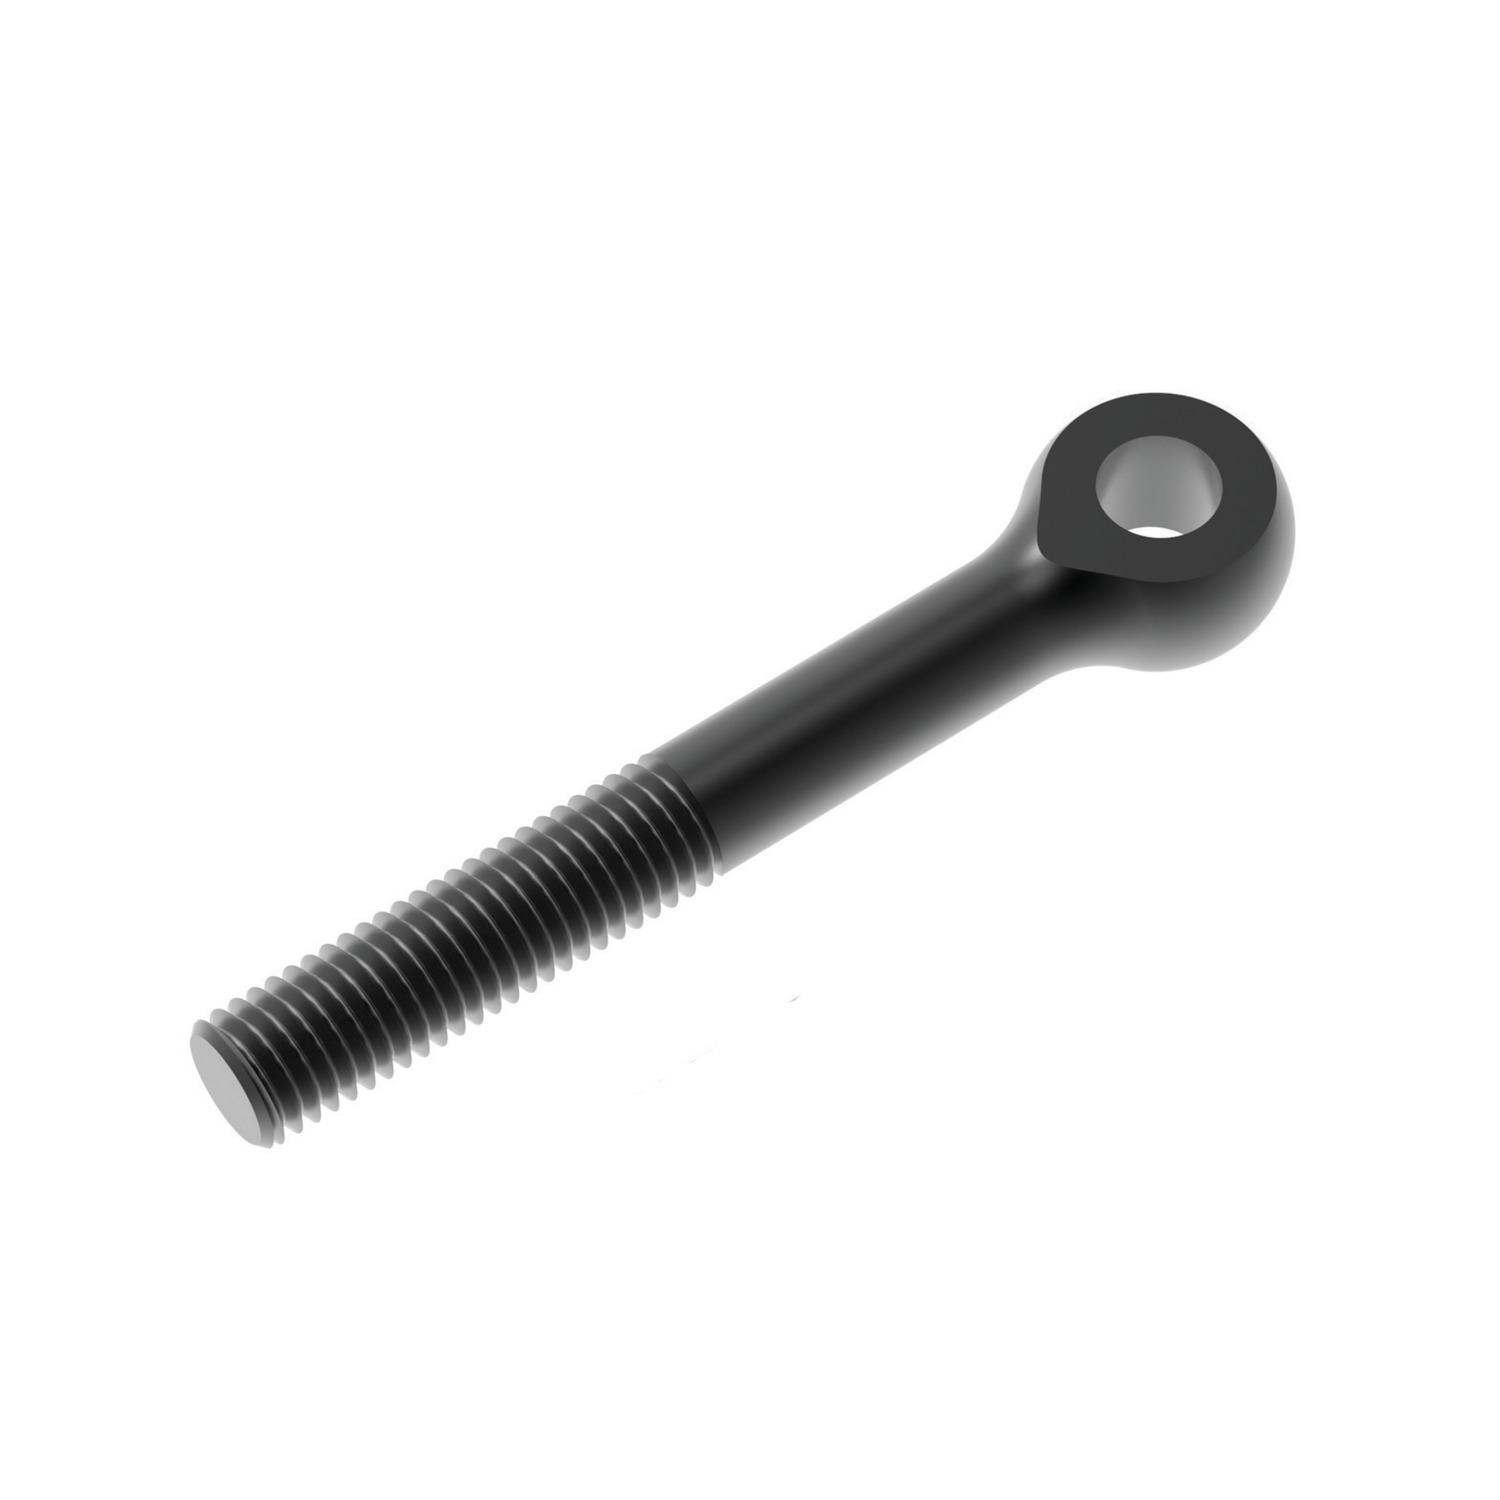 Product 18820, Steel Swing Bolts high tolerance / 